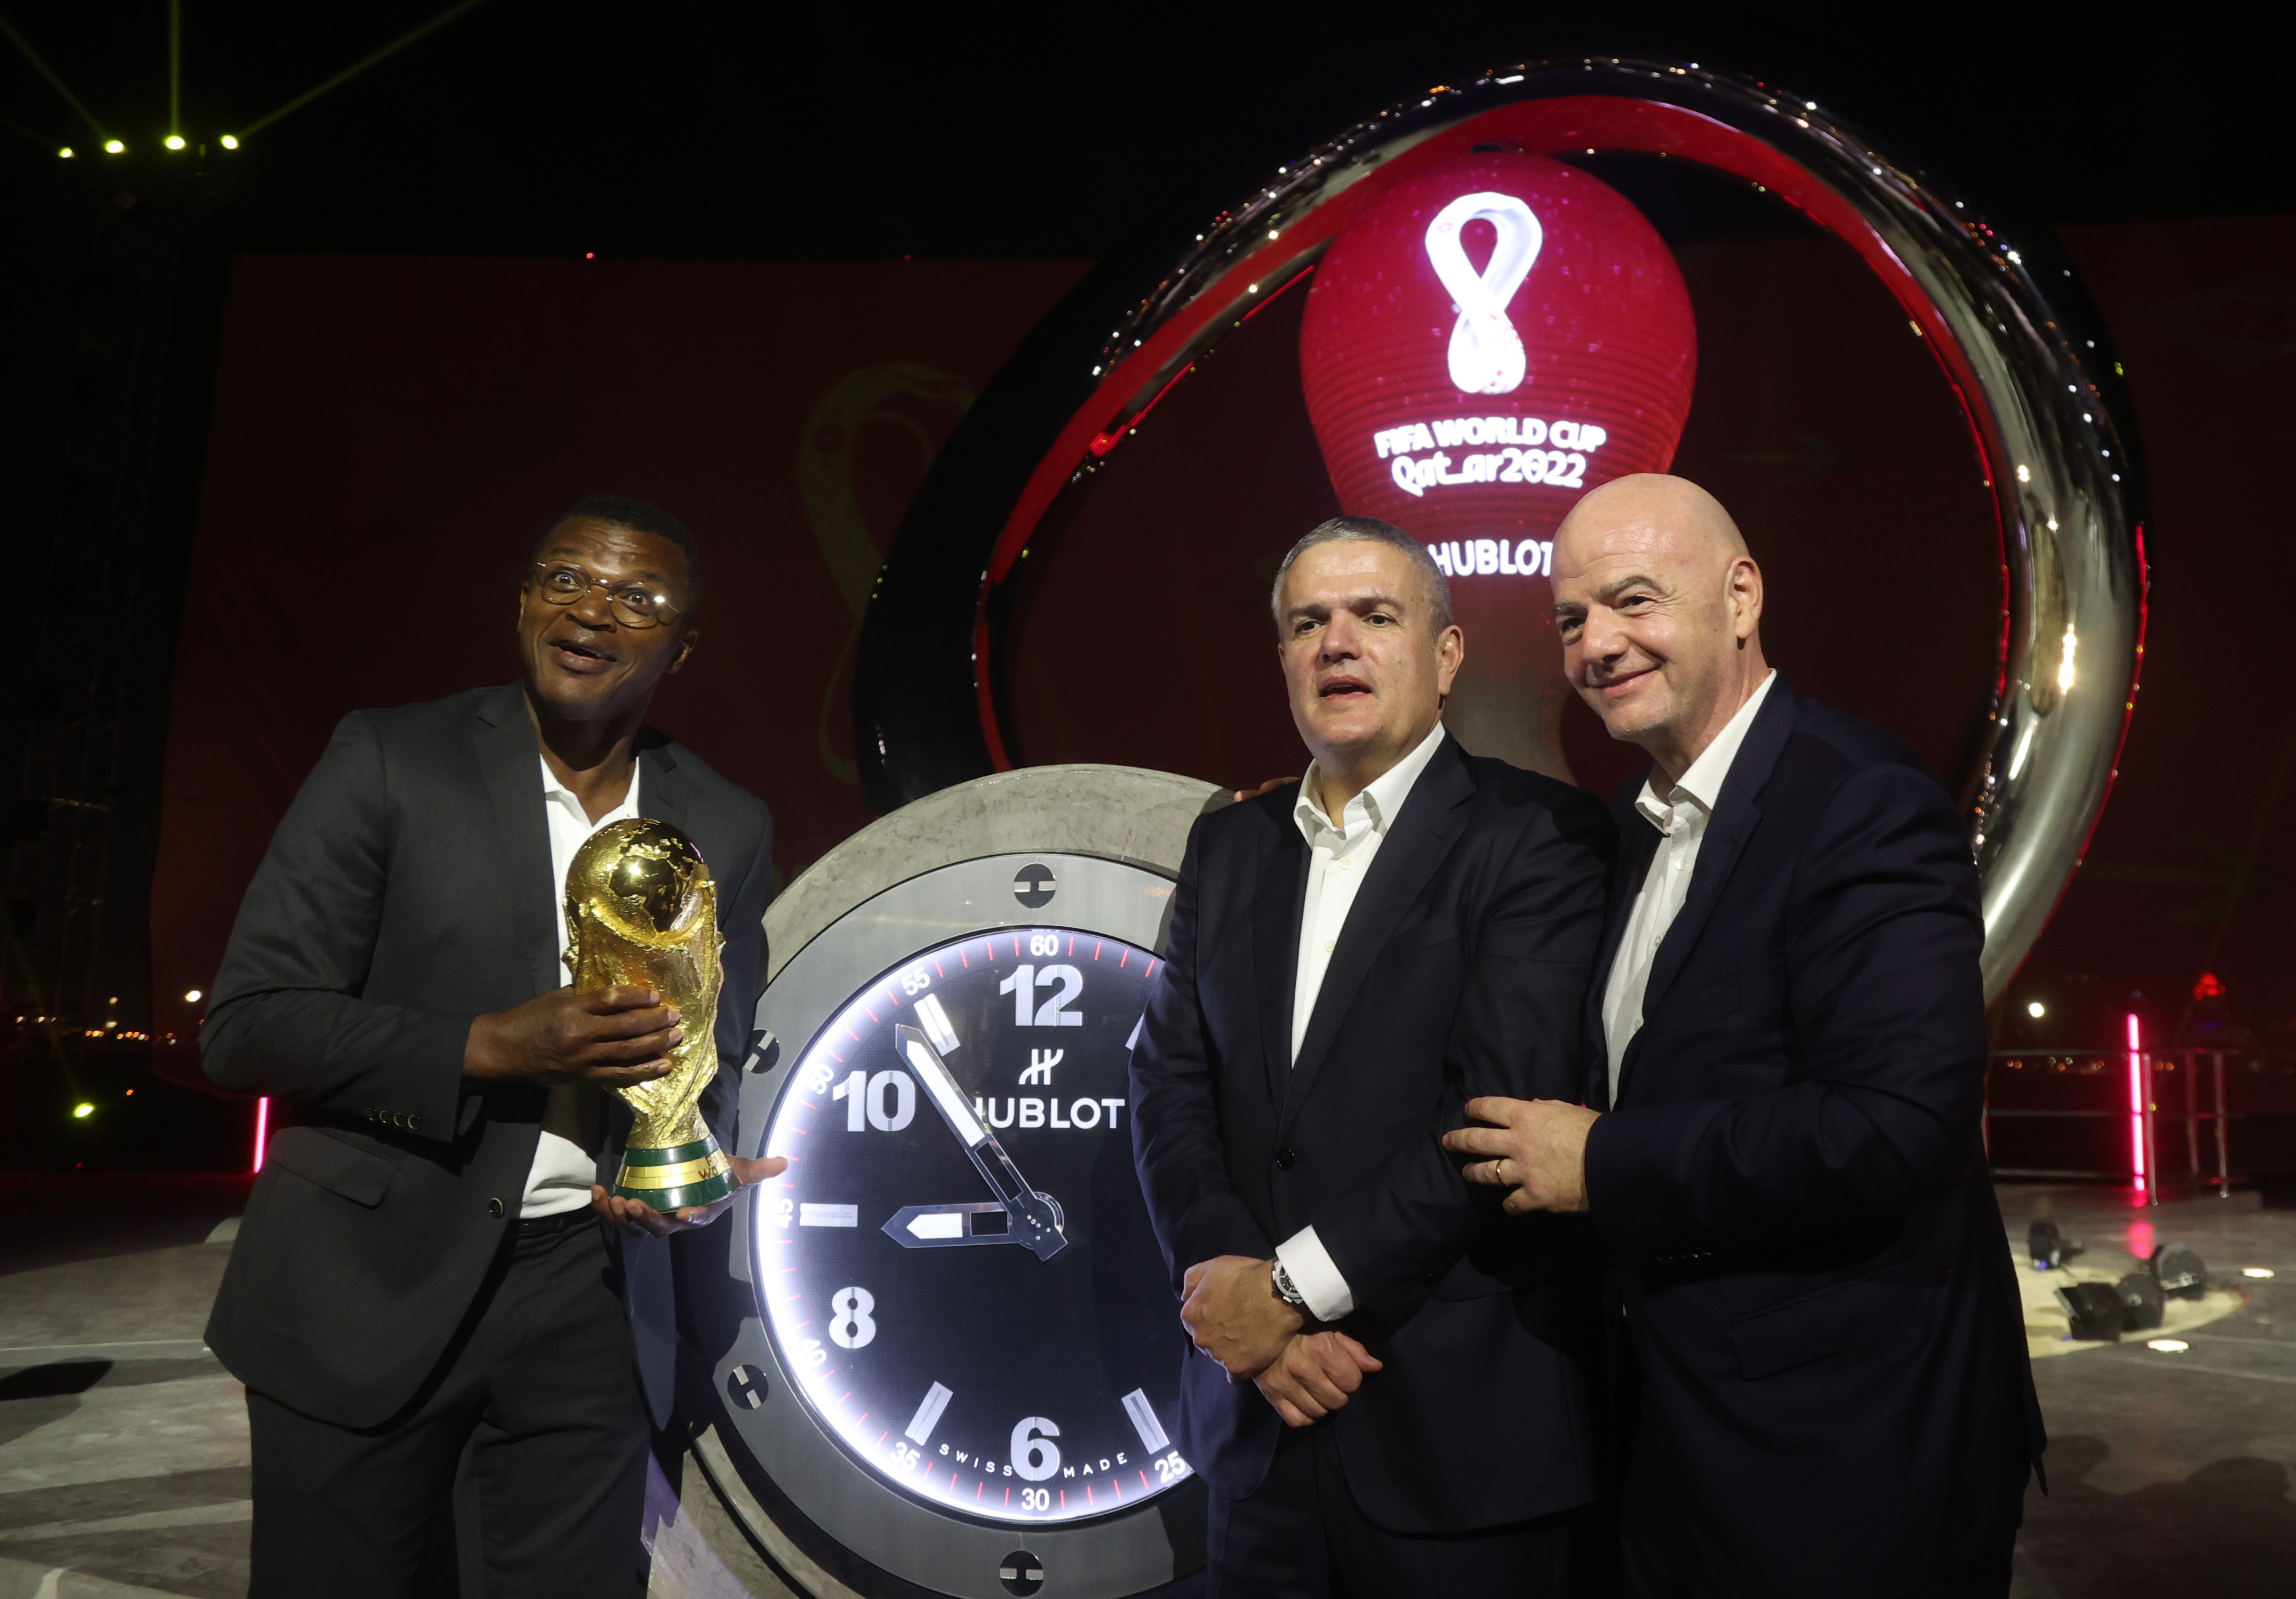 Soccer Football - One year to go until the 2022 World Cup in Qatar - Corniche Fishing Spot, Doha, Qatar - November 21, 2021 Former France player Marcel Desailly, CEO of Hublot Ricardo Guadalupe and FIFA president Gianni Infantino pose with the world cup REUTERS/Ibraheem Al Omari